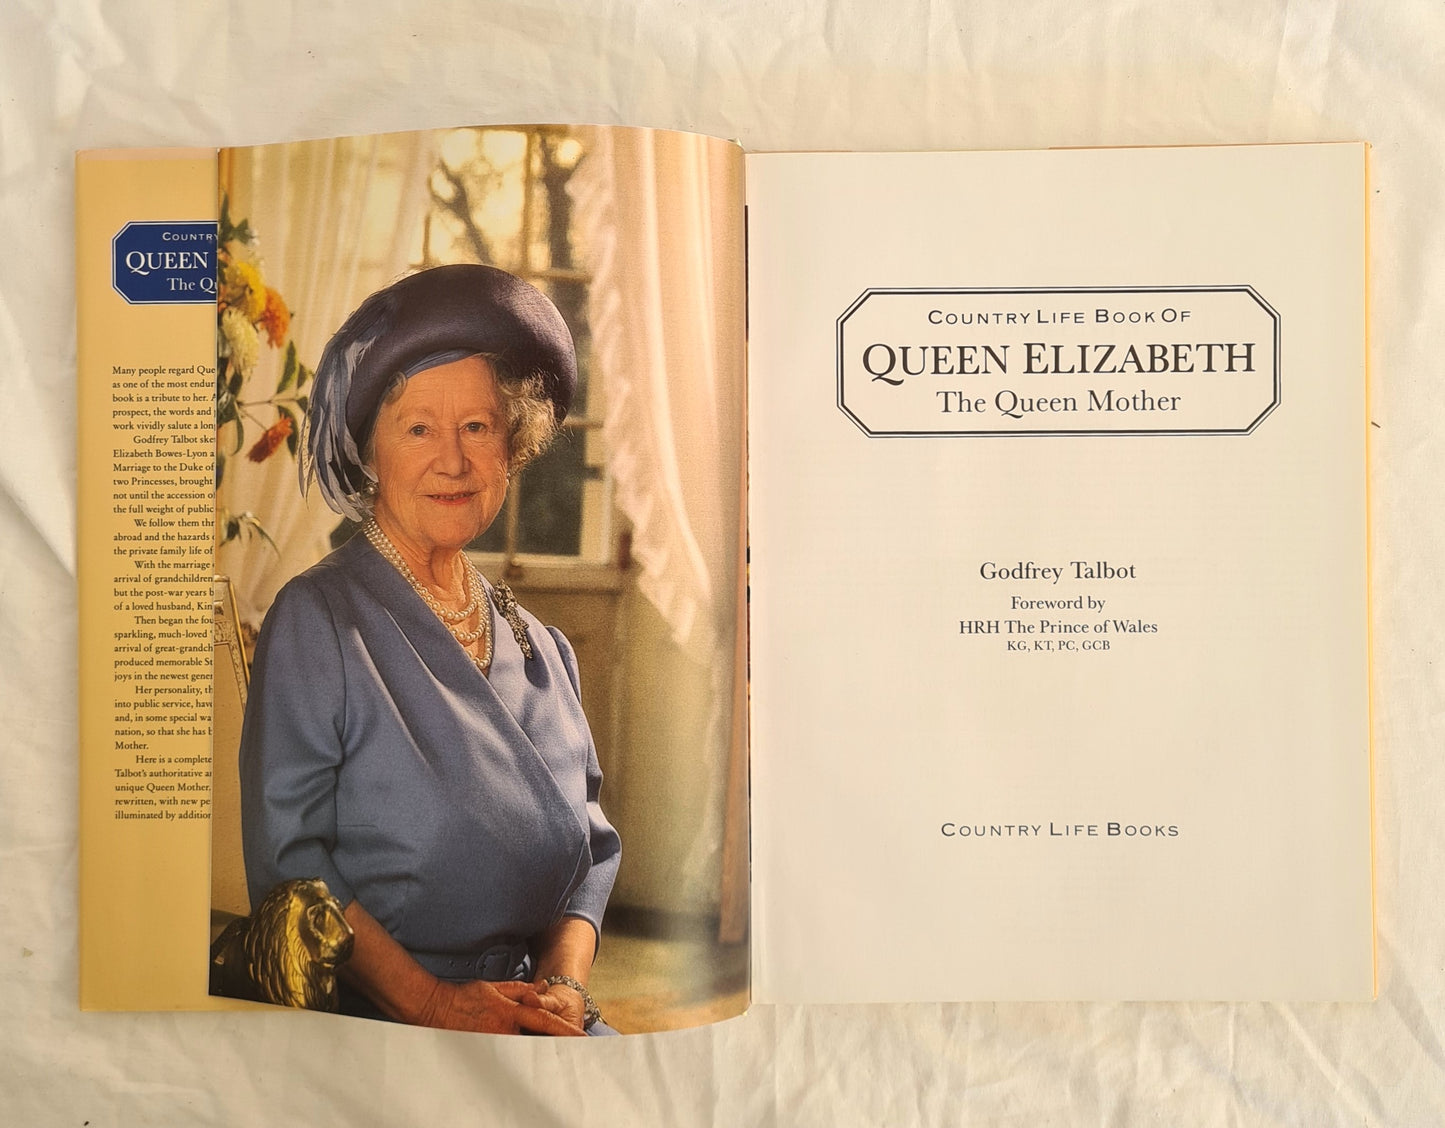 Country Life Book of Queen Elizabeth by Godfrey Talbot